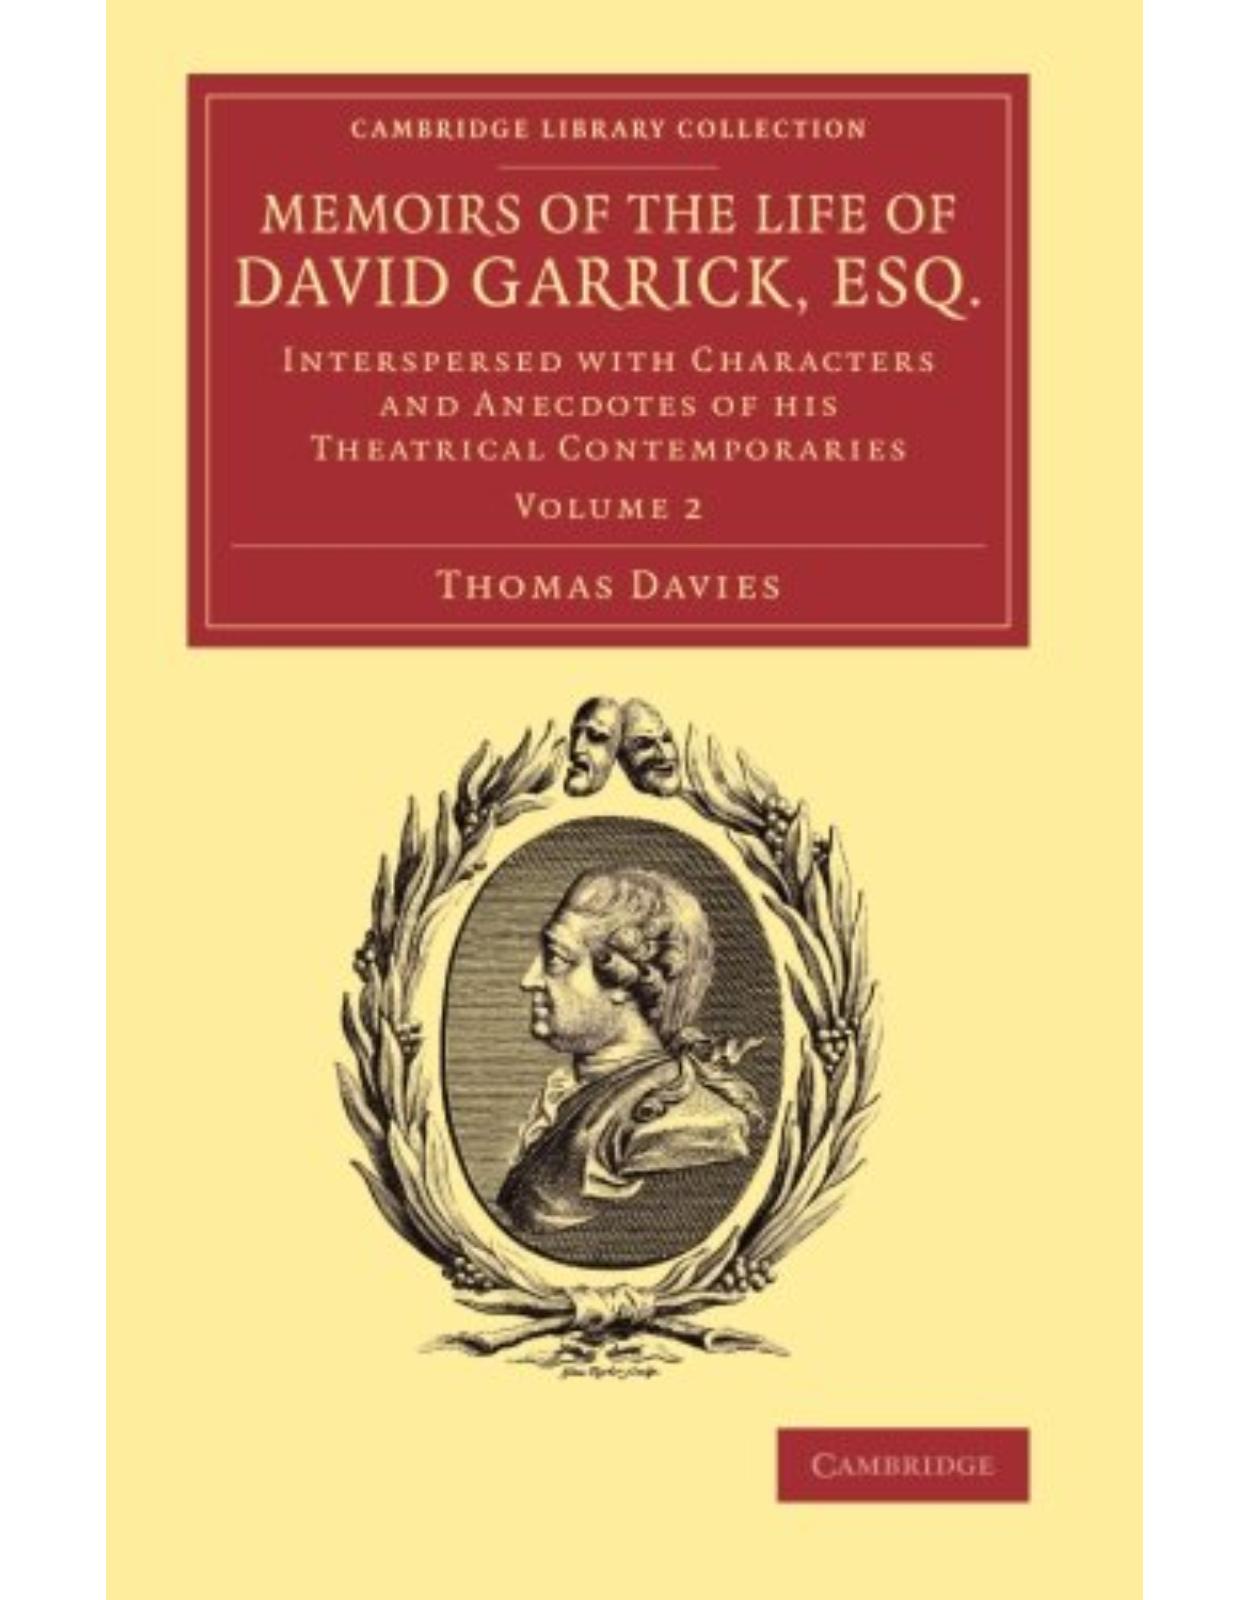 Memoirs of the Life of David Garrick, Esq. 2 volume Set: Memoirs of the Life of David Garrick, Esq.: Interspersed with Characters and Anecdotes of his ... Library Collection - Literary Studies)